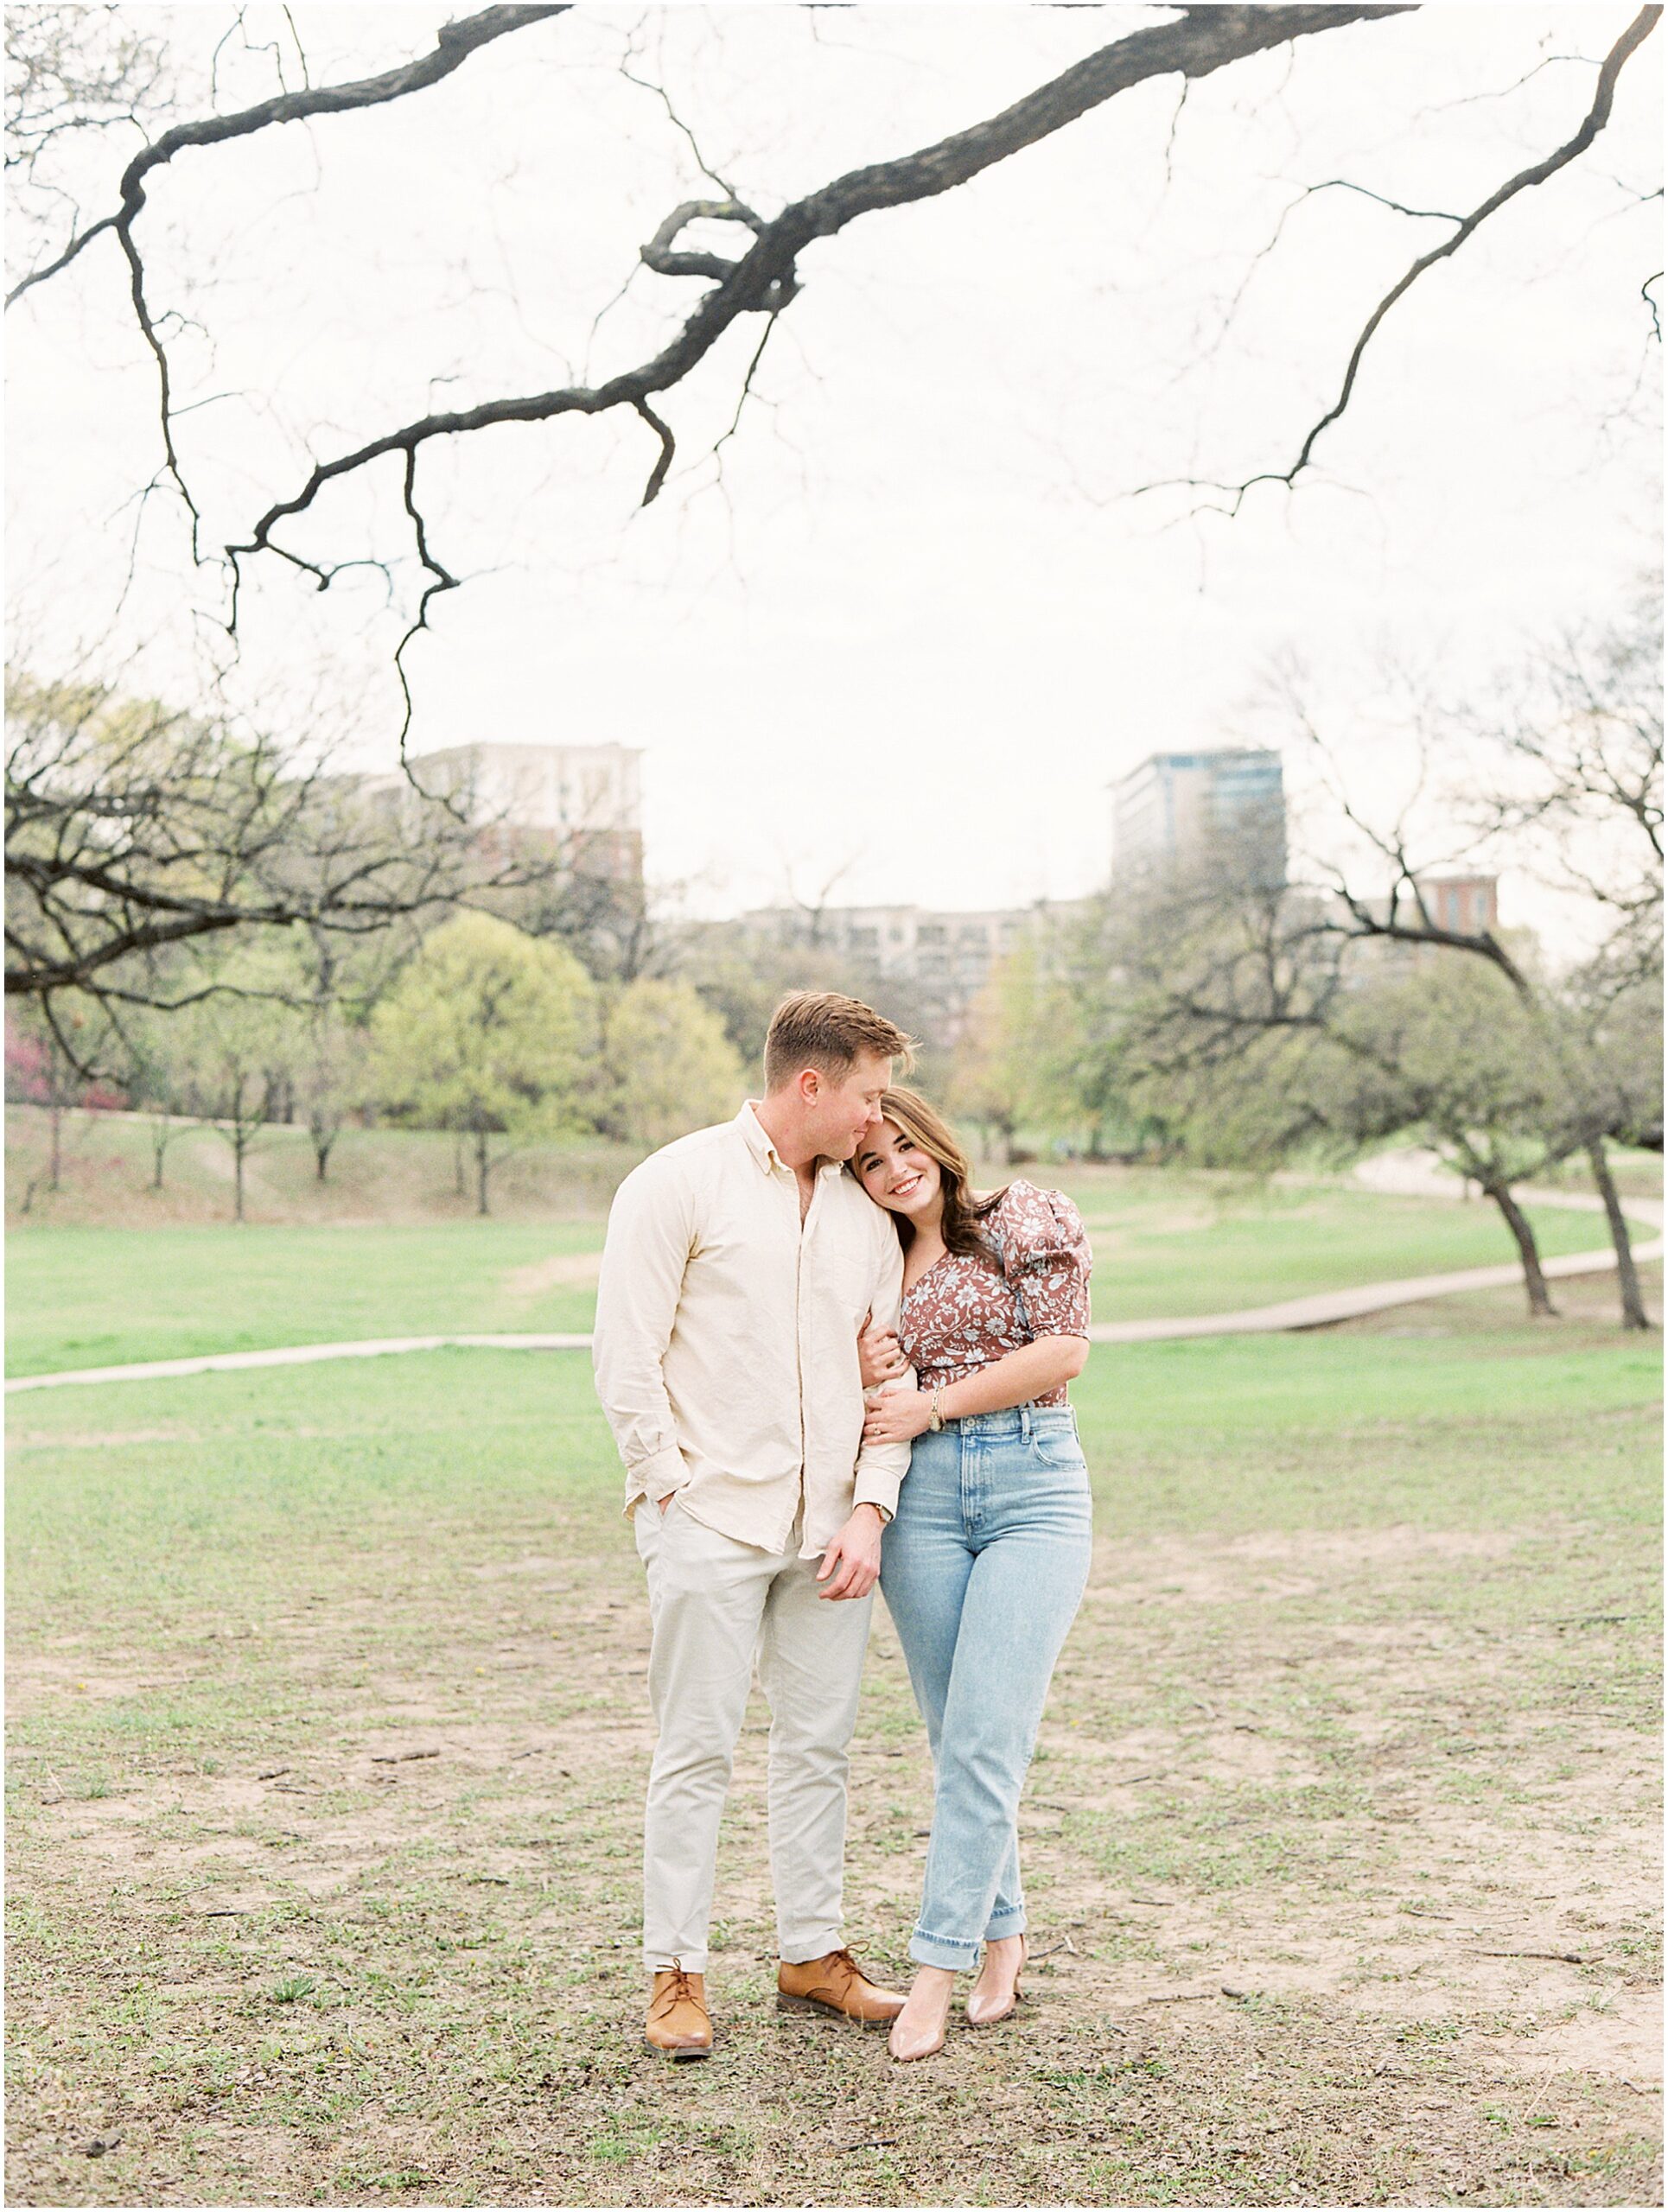 Engaged Couple Catherine and Jack in a sweet embrace in Turtle creek dallas park